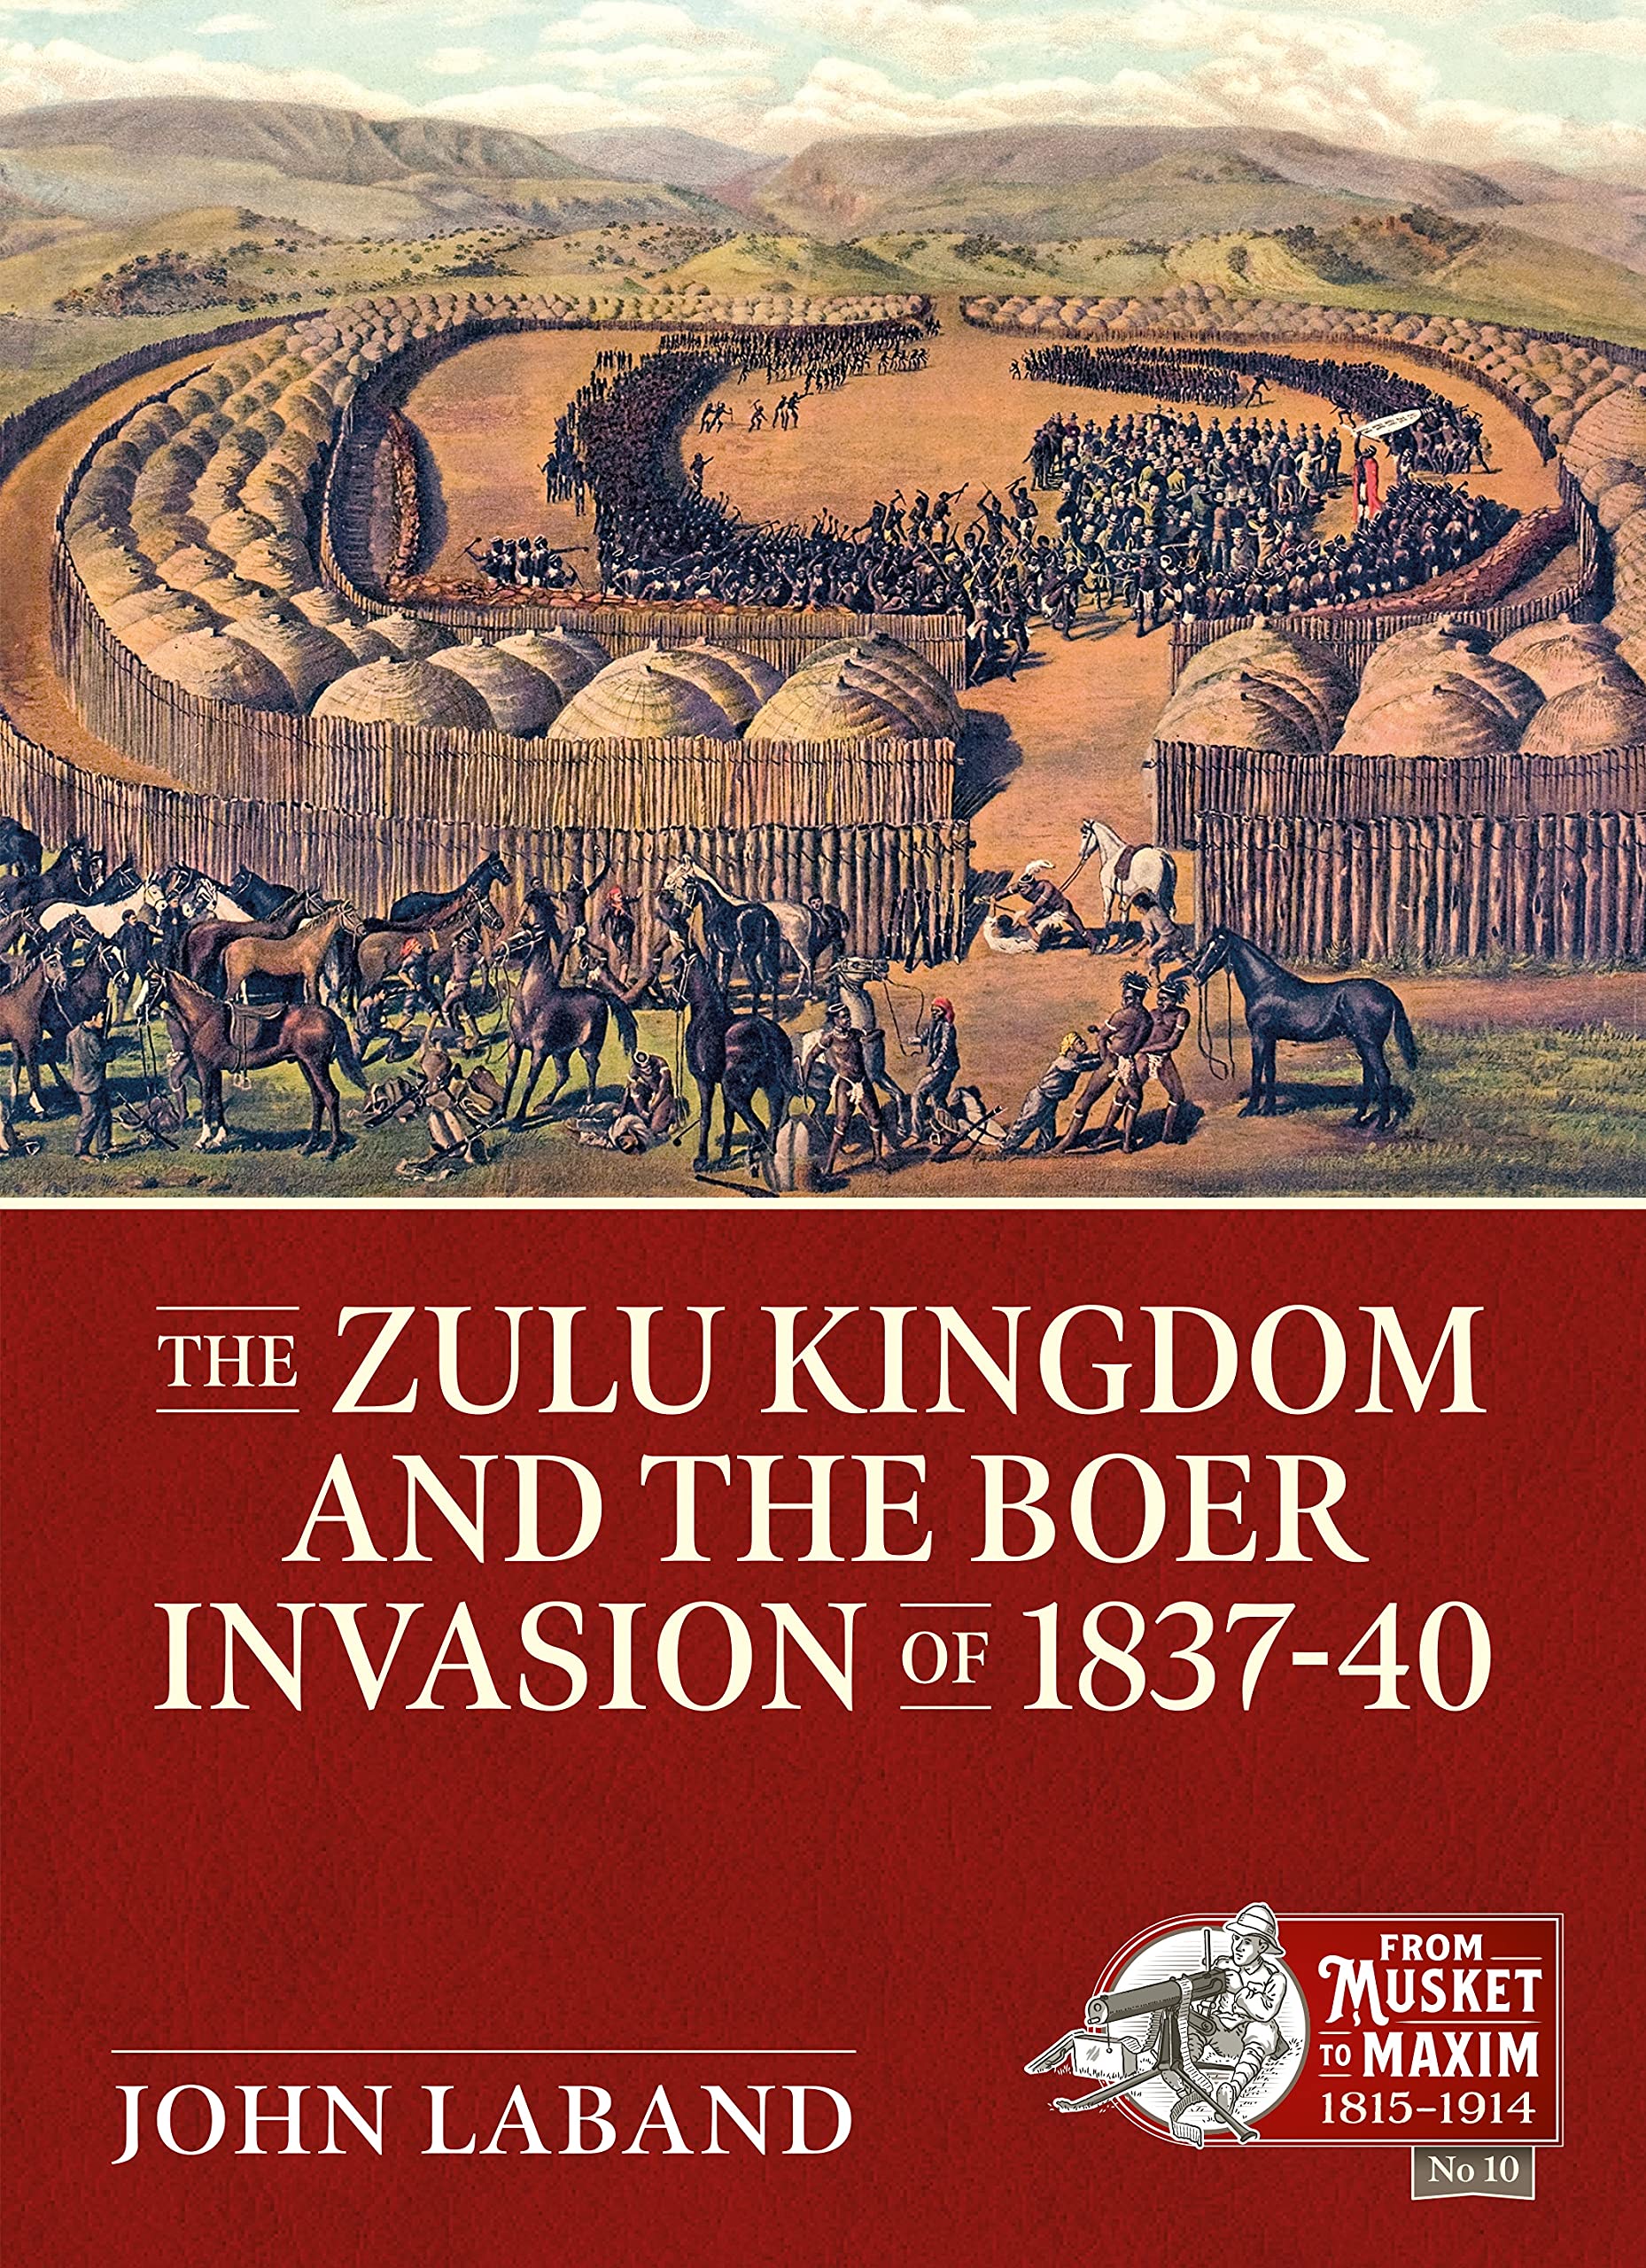 Zulu Kingdom and the Boer Invasion of 1837-1840